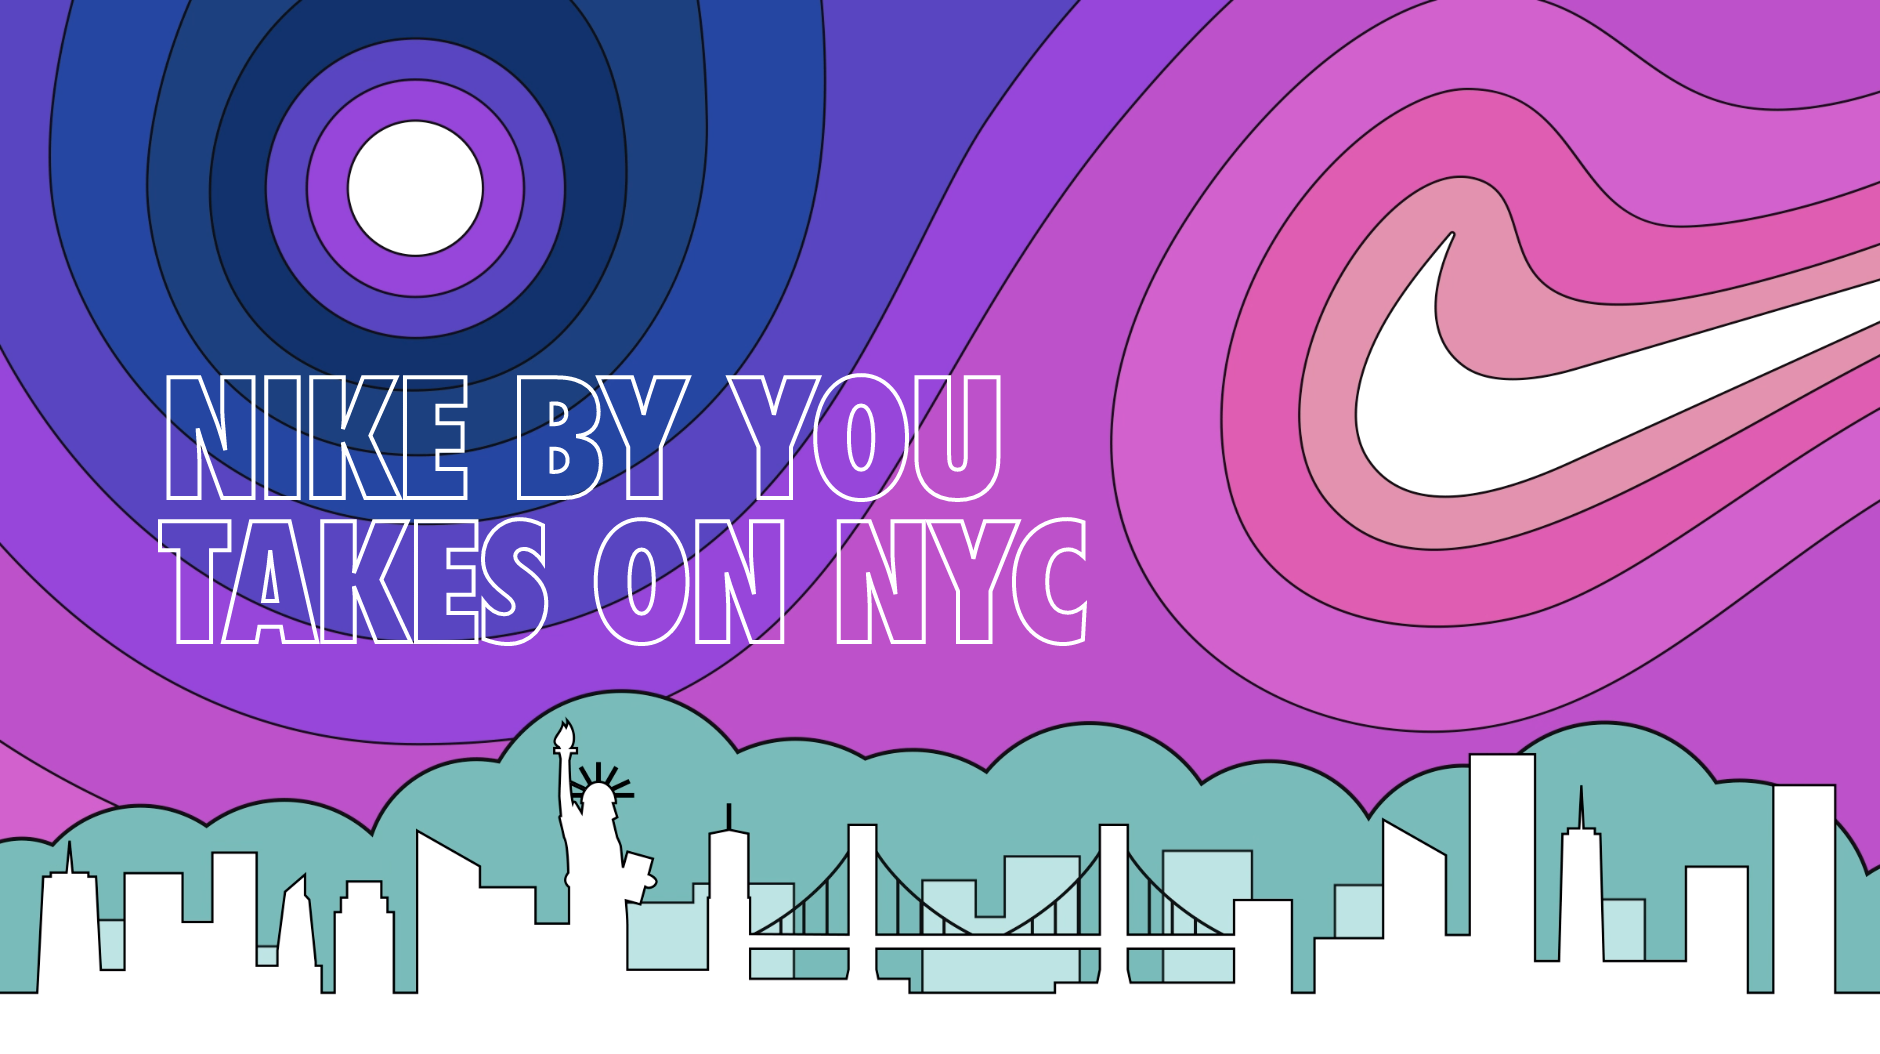 nyc by you nike